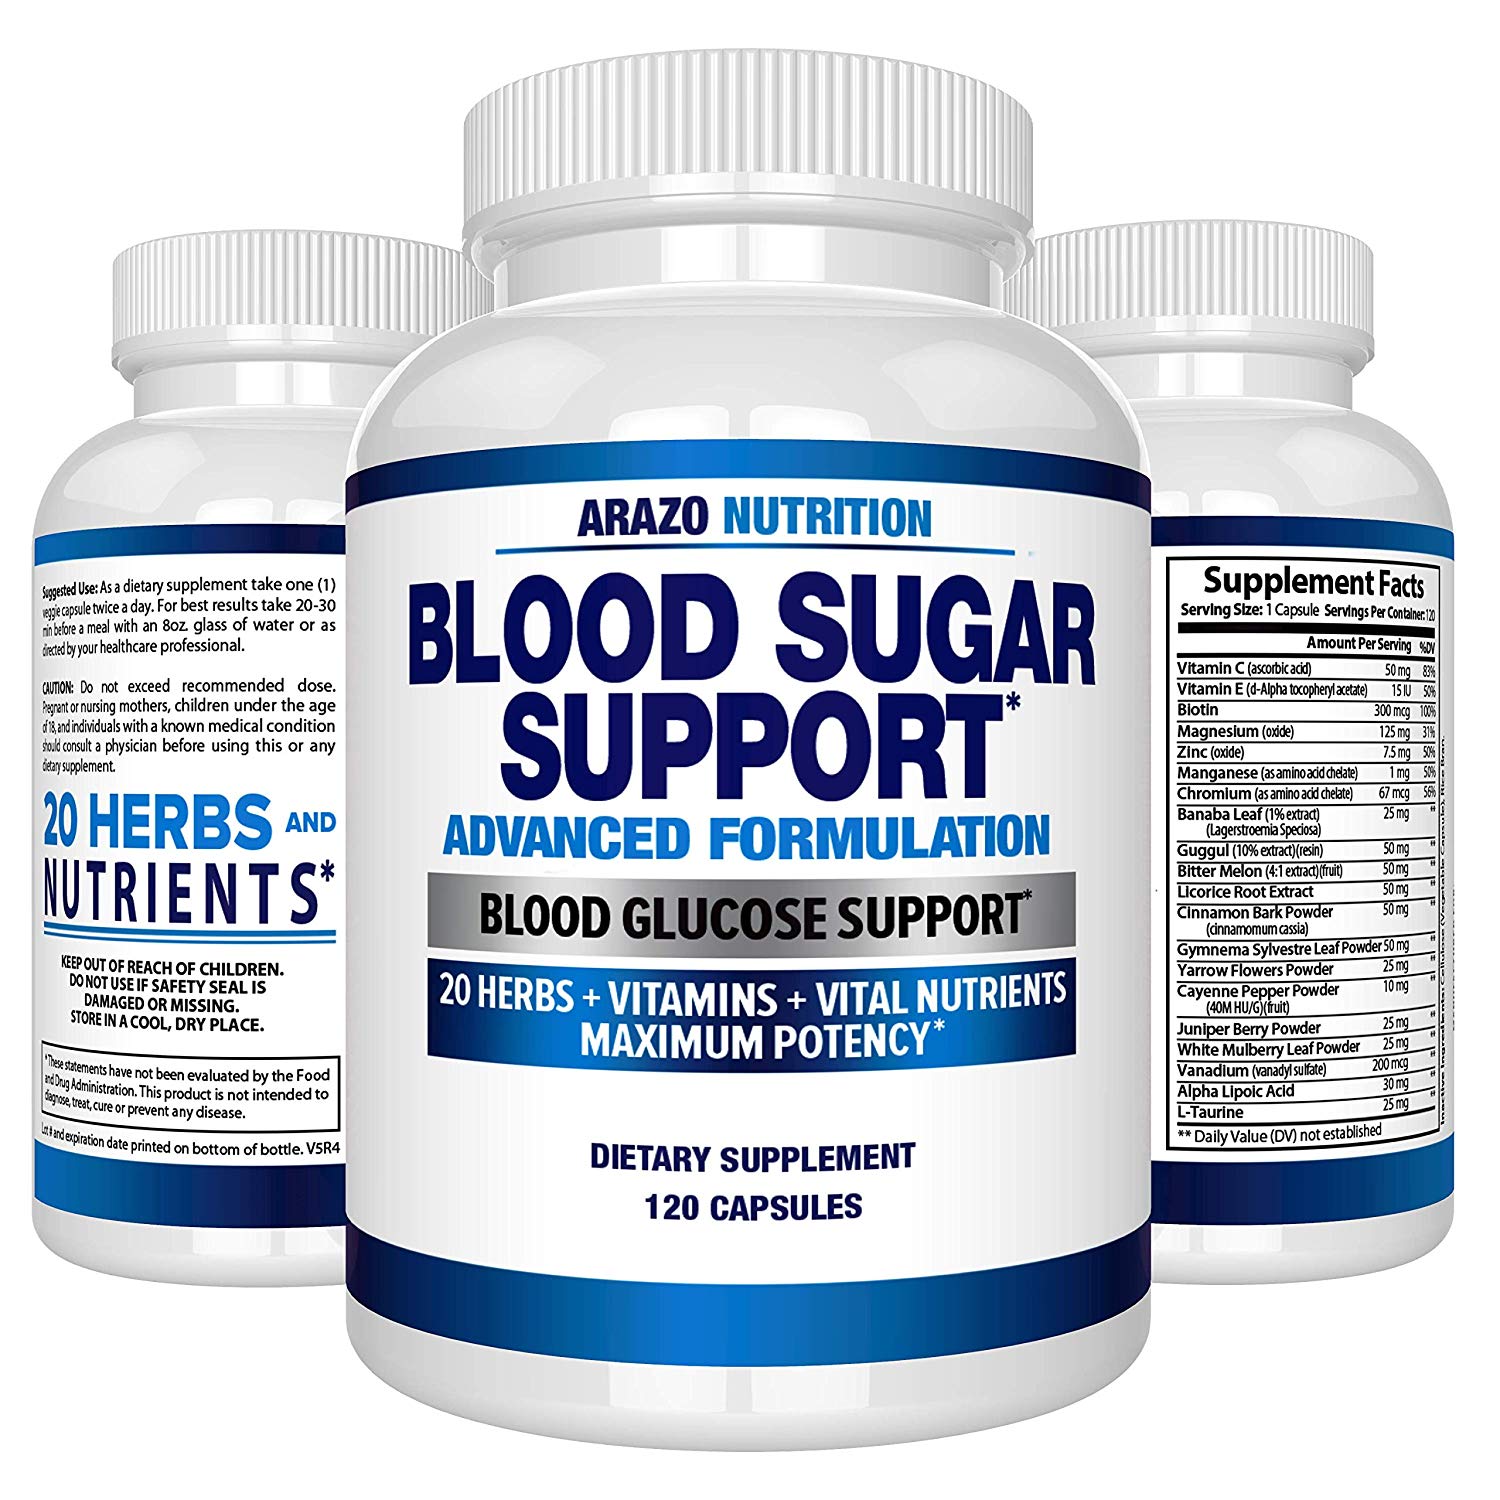 Blood Sugar Support Supplement - 20 HERBS & Multivitamin for Blood Sugar Control by Arazo Nutrition